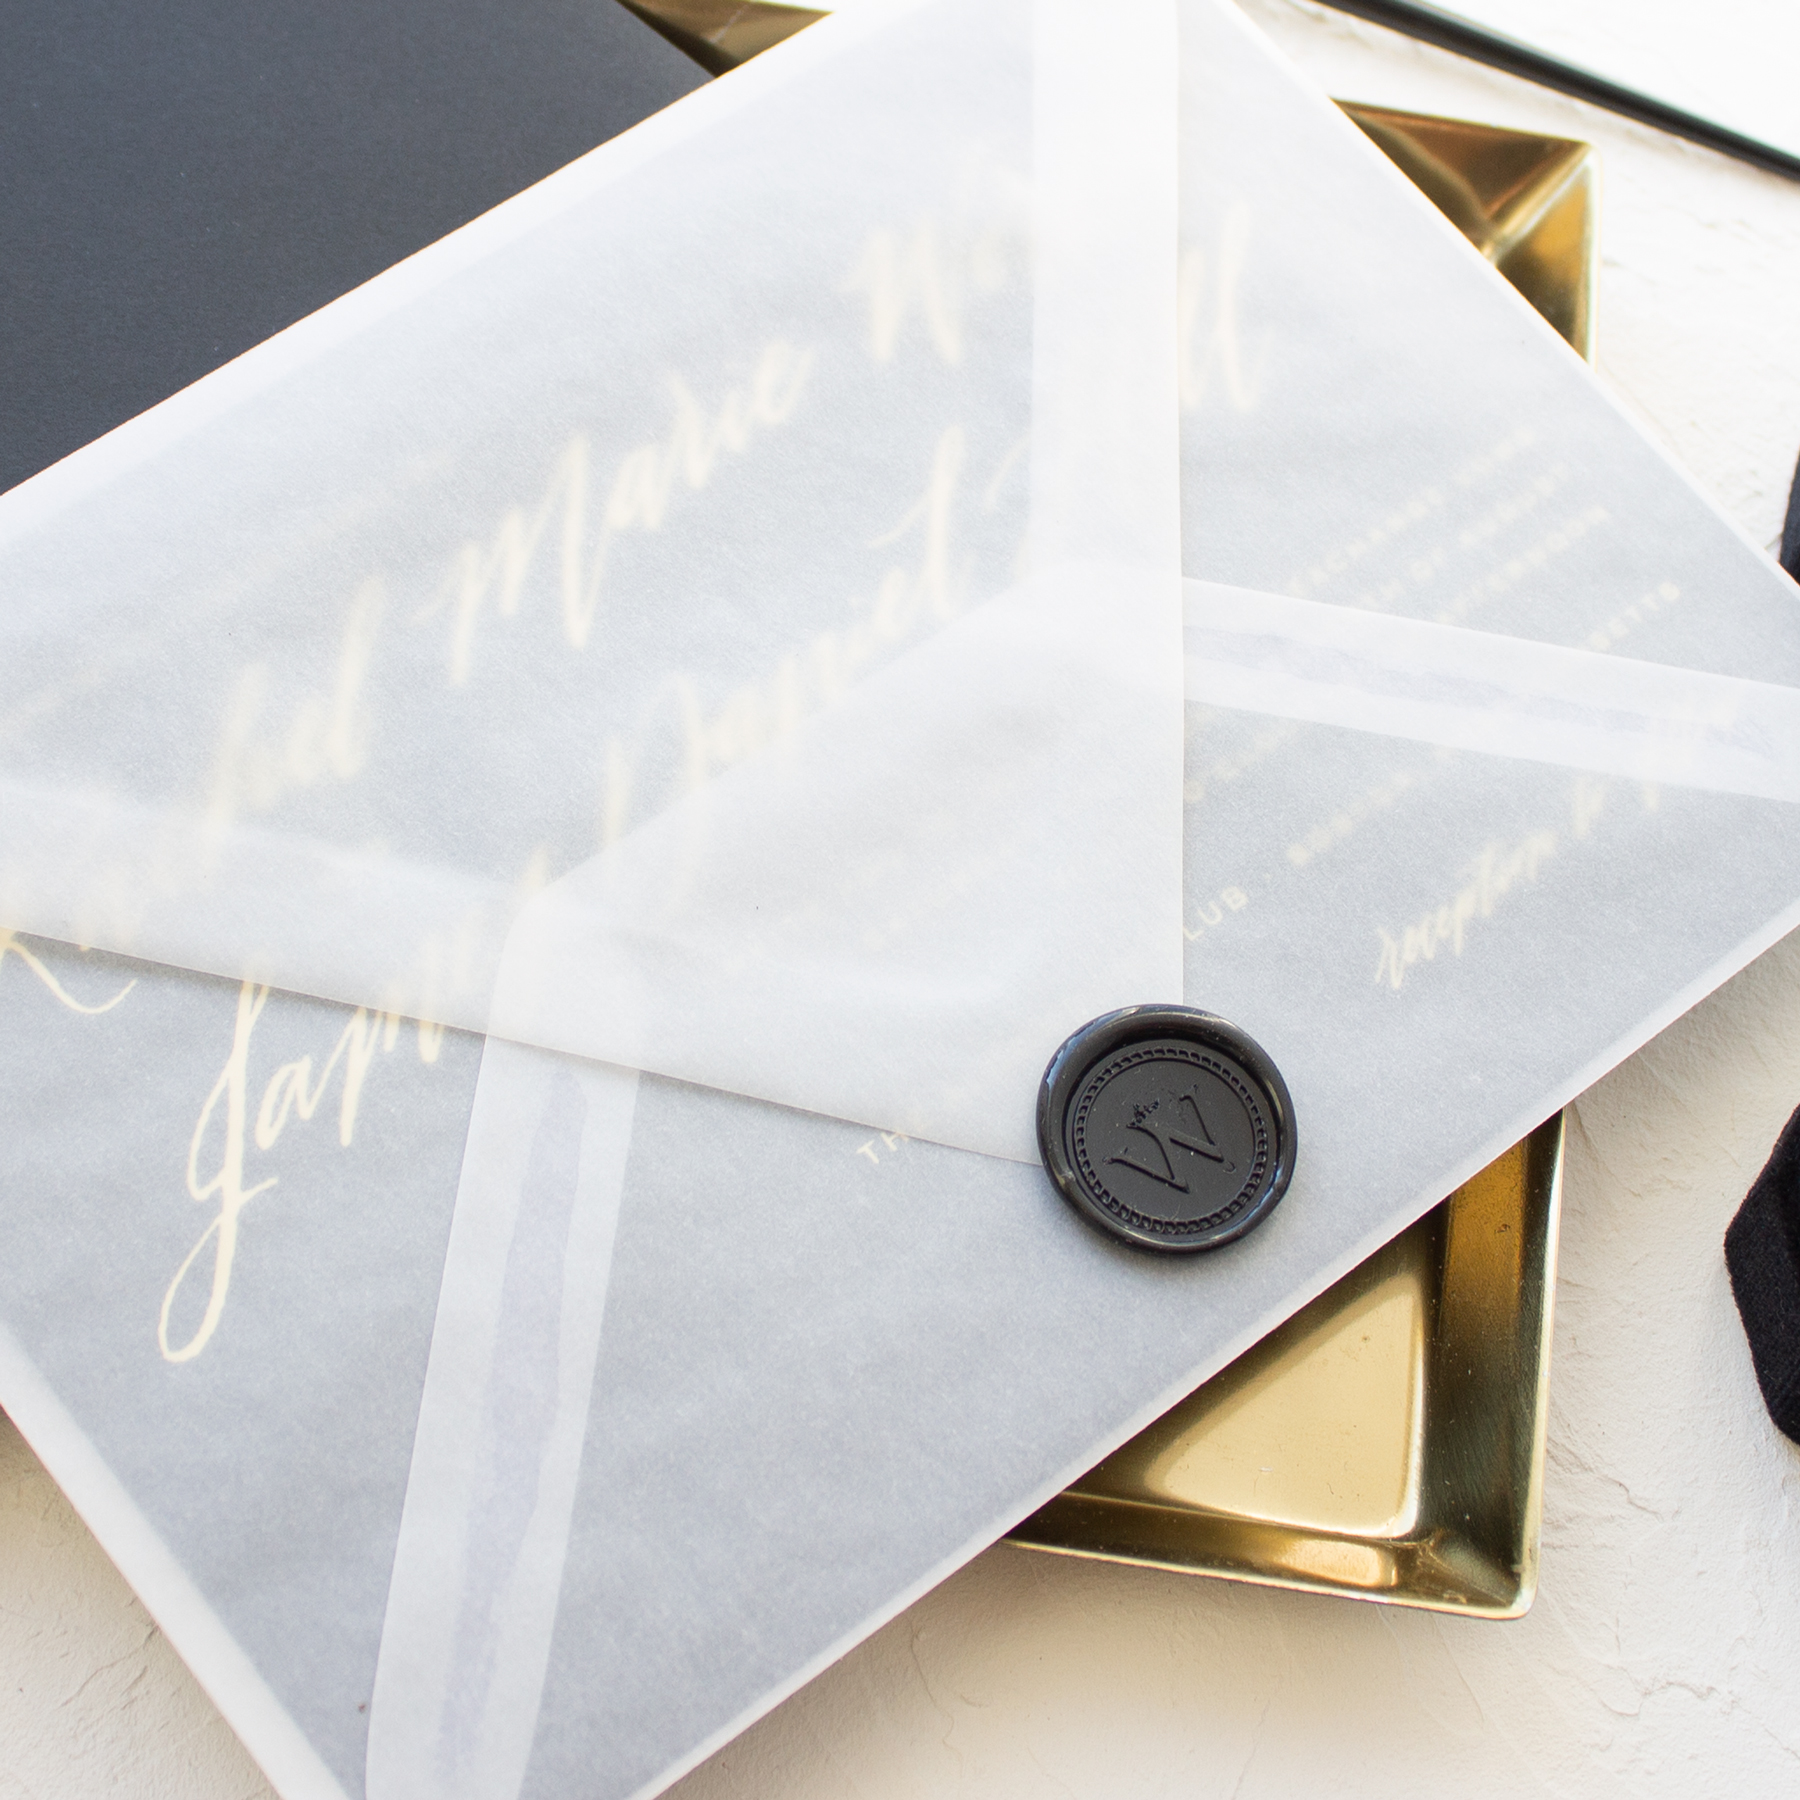 vellum envelope with wax seal